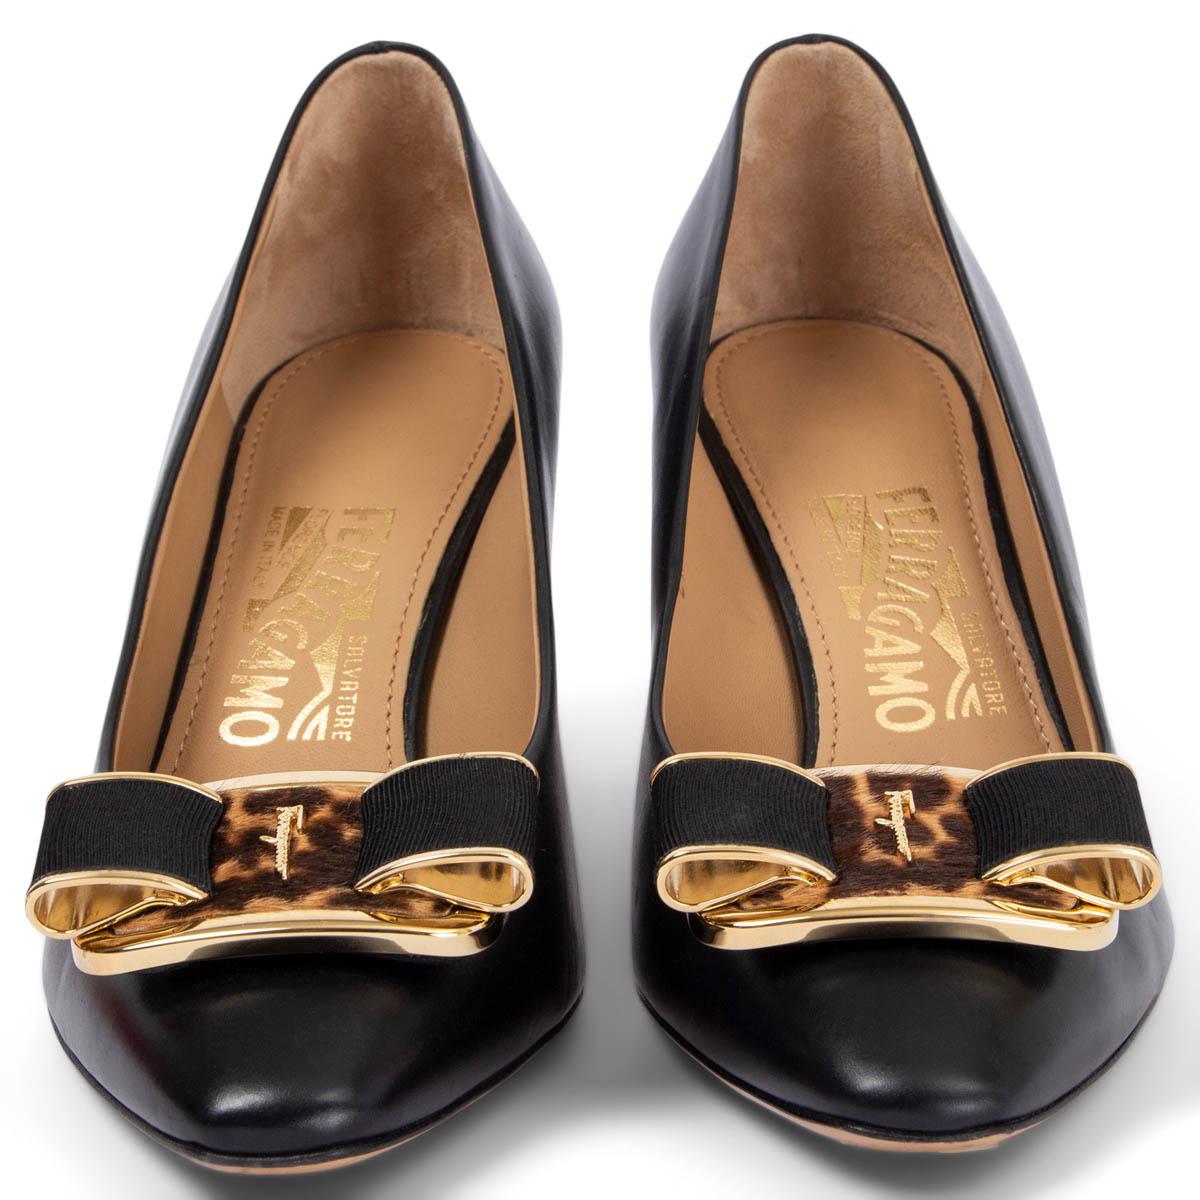 100% authentic Salvatore Ferragamo pumps in black smooth calfskin embellished with a gold-tone metal buckle in leopard-print calf-hair and black grosgrain. Have been worn once or twice and are in virtually new condition. 

Measurements
Imprinted